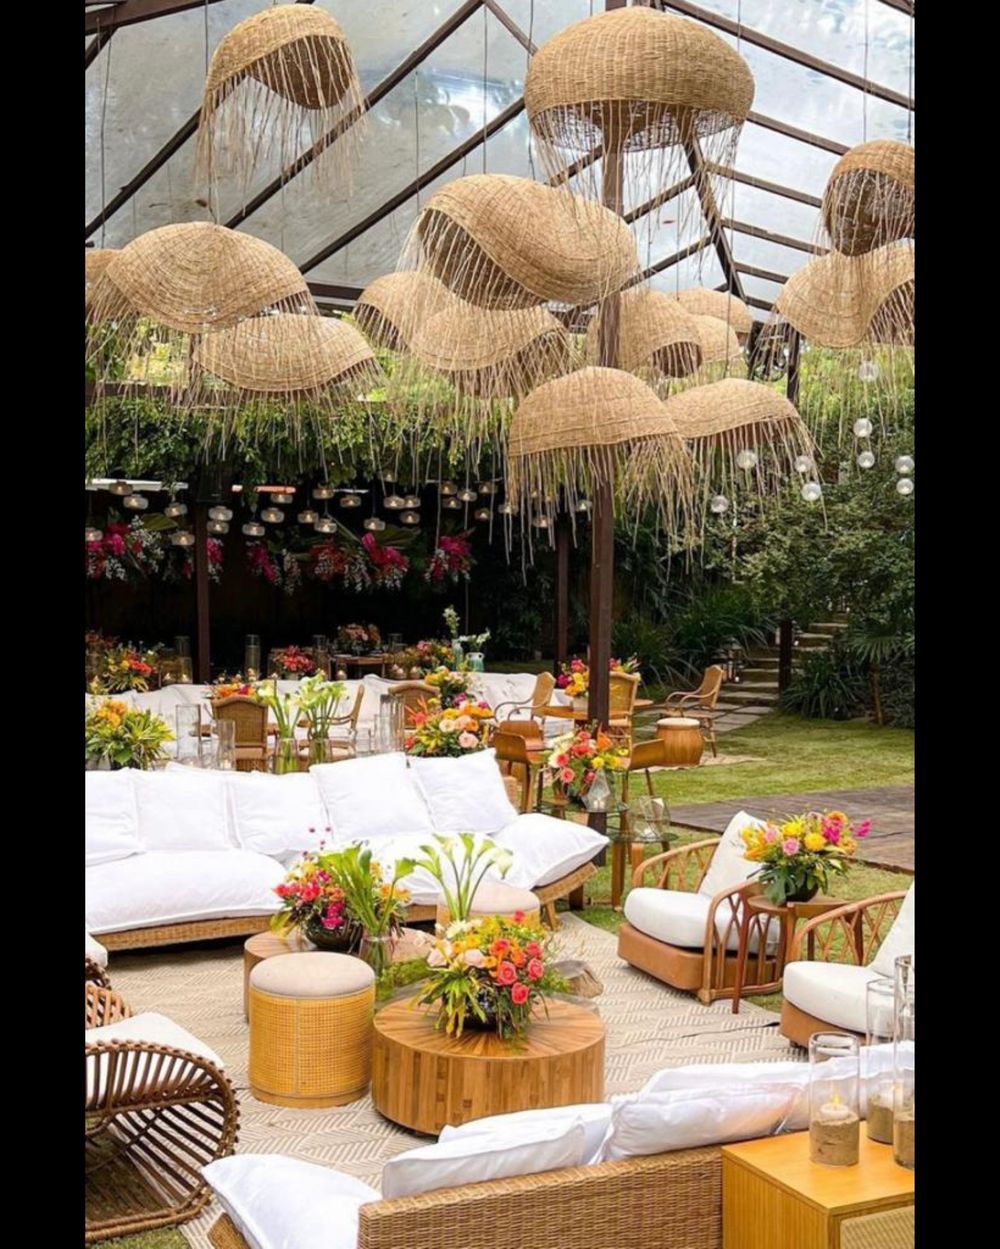 Photo From Rustic Jute Based Decor - By Kalvin International